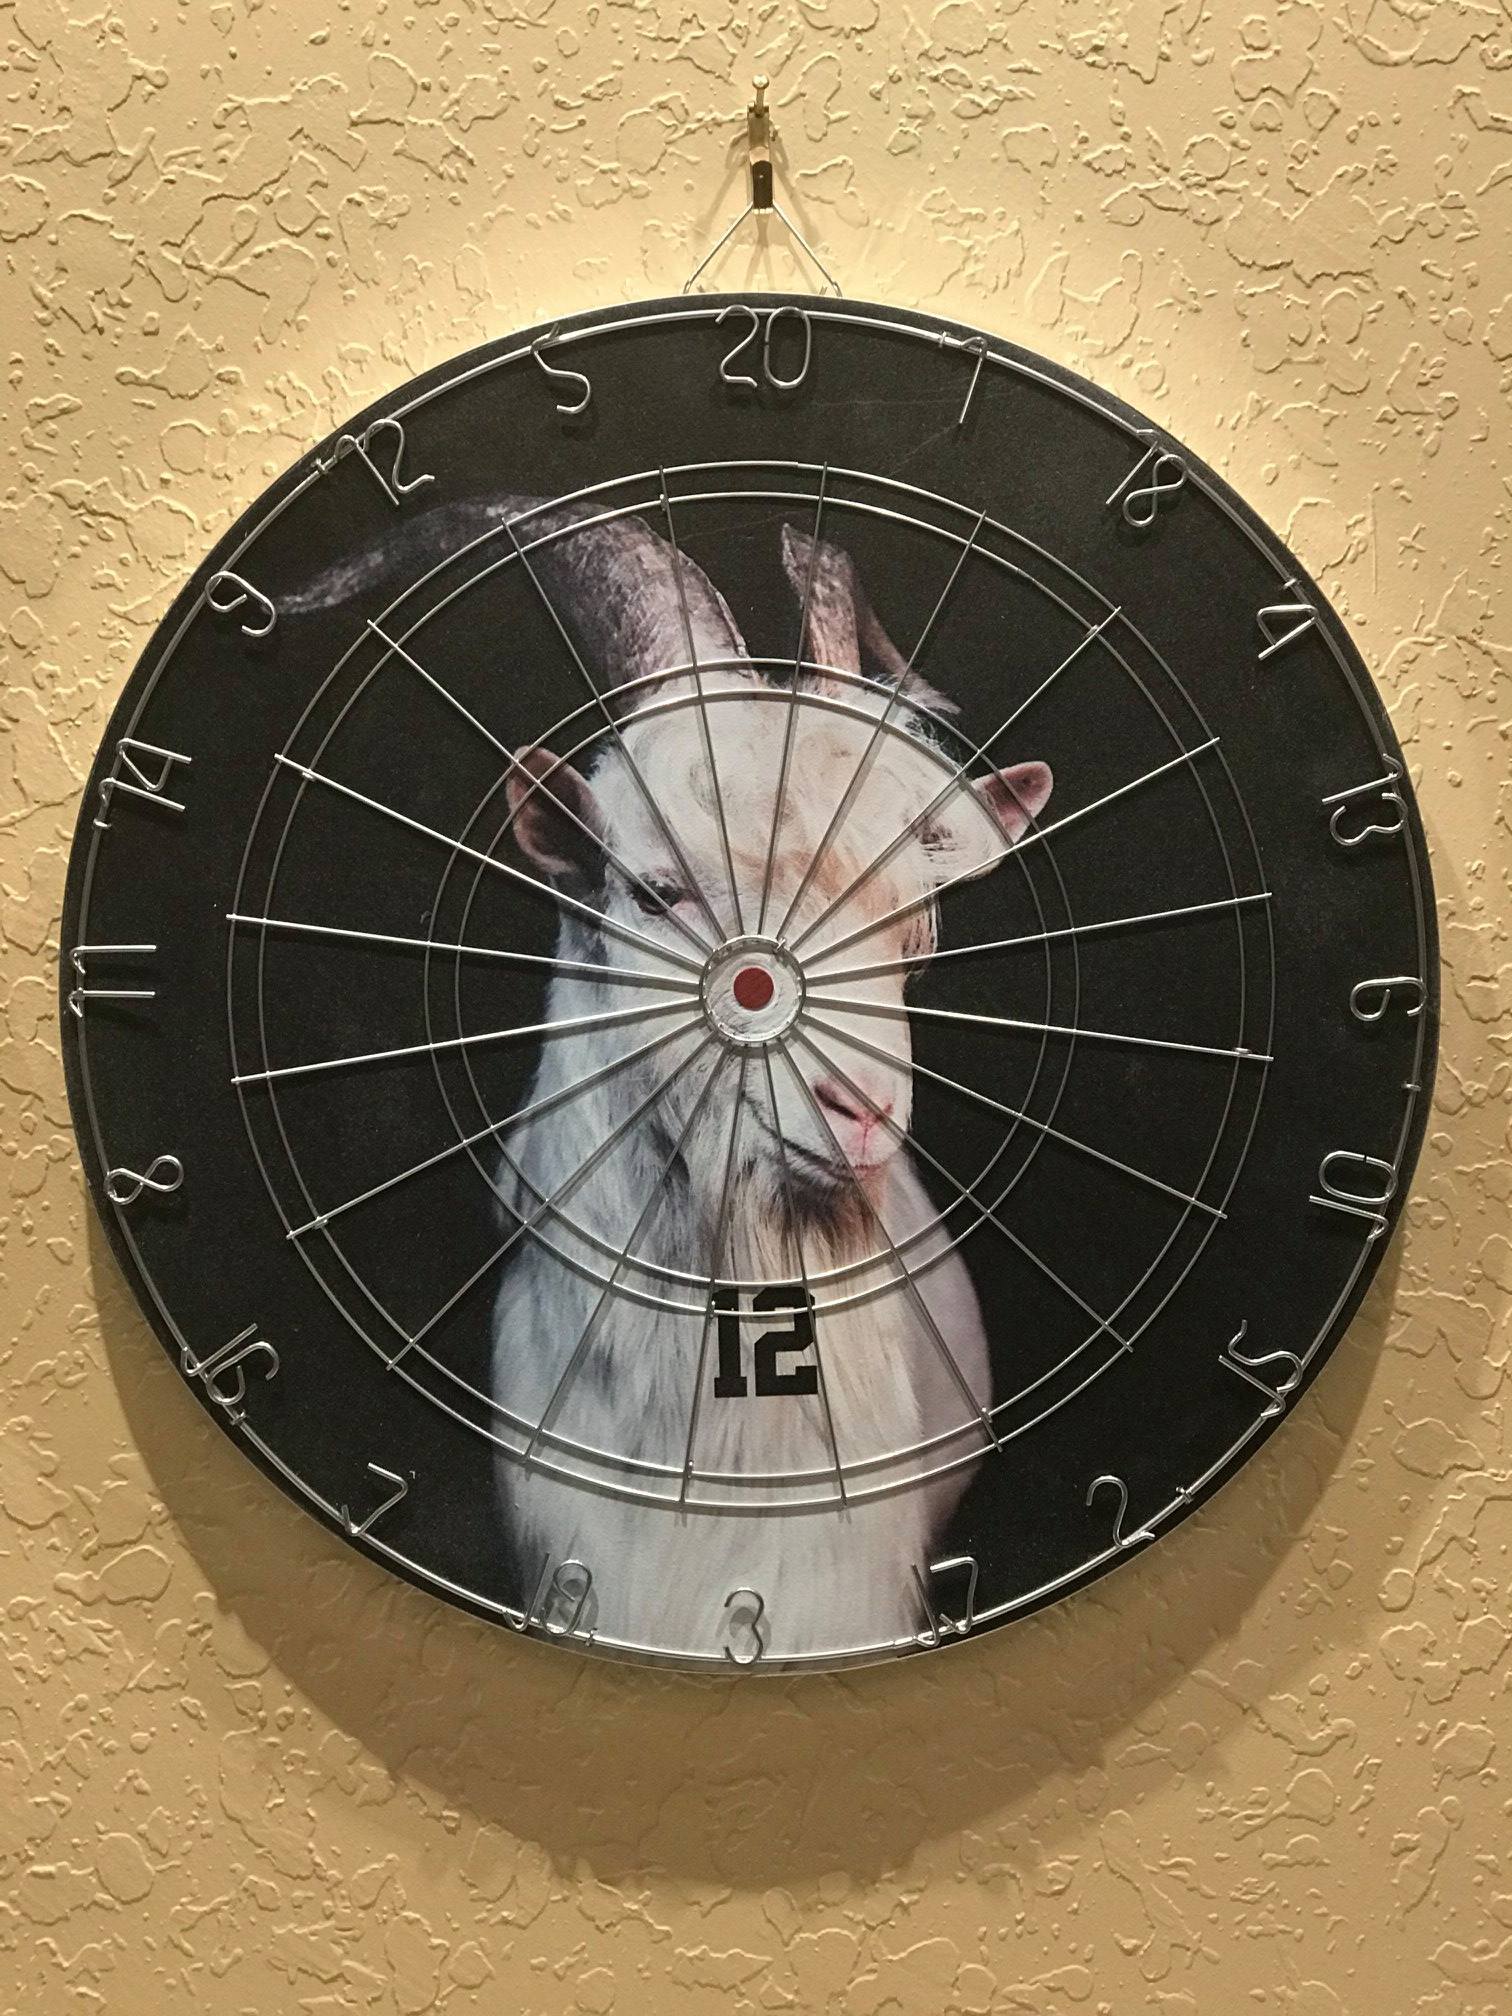 Photograph of dart board with goat 12